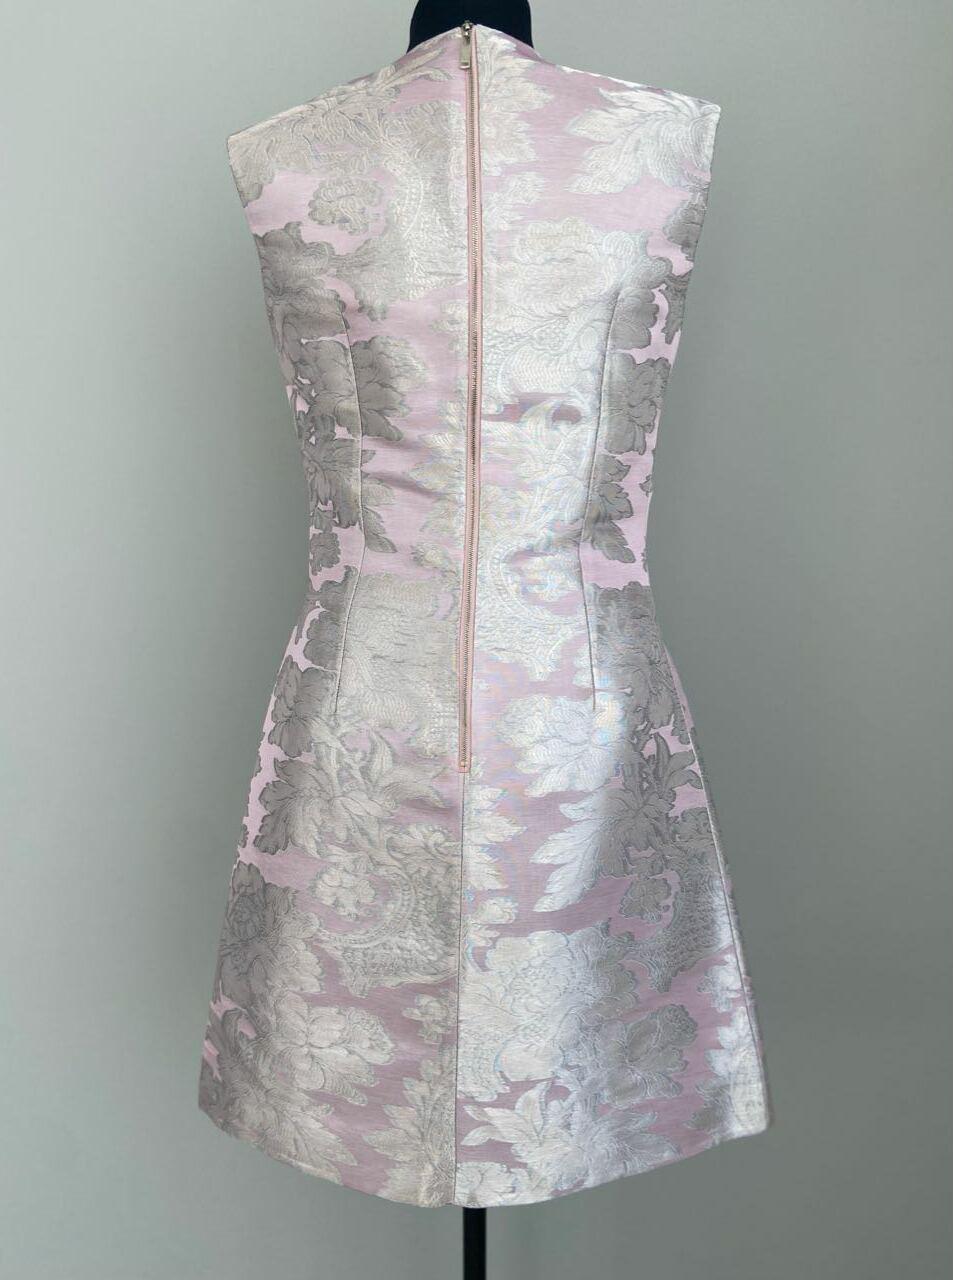 LOUIS VUITTON

Collection Spring/Summer 2018

Stunningly beautiful evening dress with floral print, slightly glittery.
Fitted. Effective, perfect fit. Rare Dress

Size EU 42 
Content: 62% viscose, 21% metal, 17% polyester
Lining: 100% silk

Made on